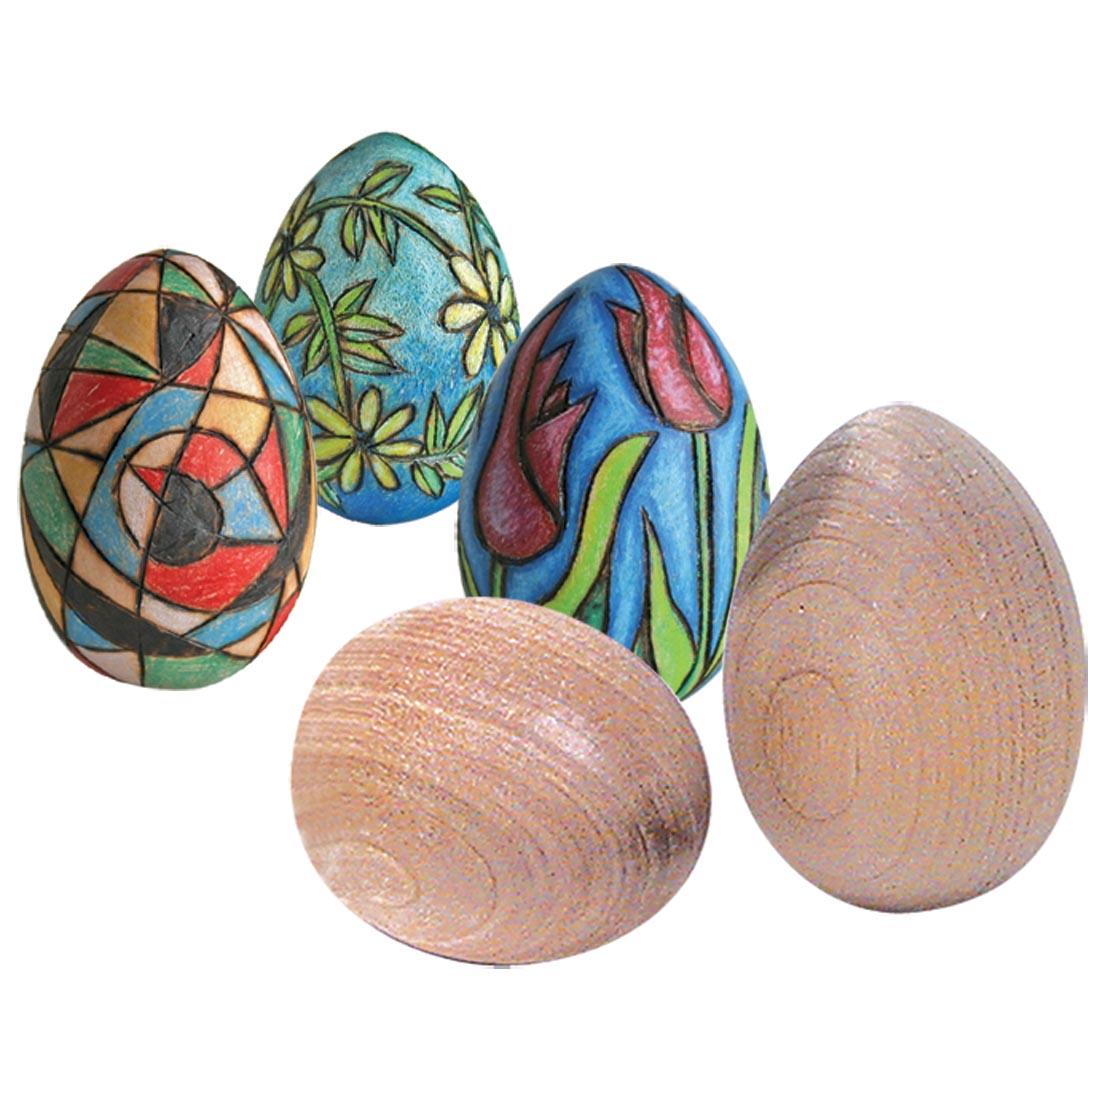 Five Wooden Eggs, three of them decorated